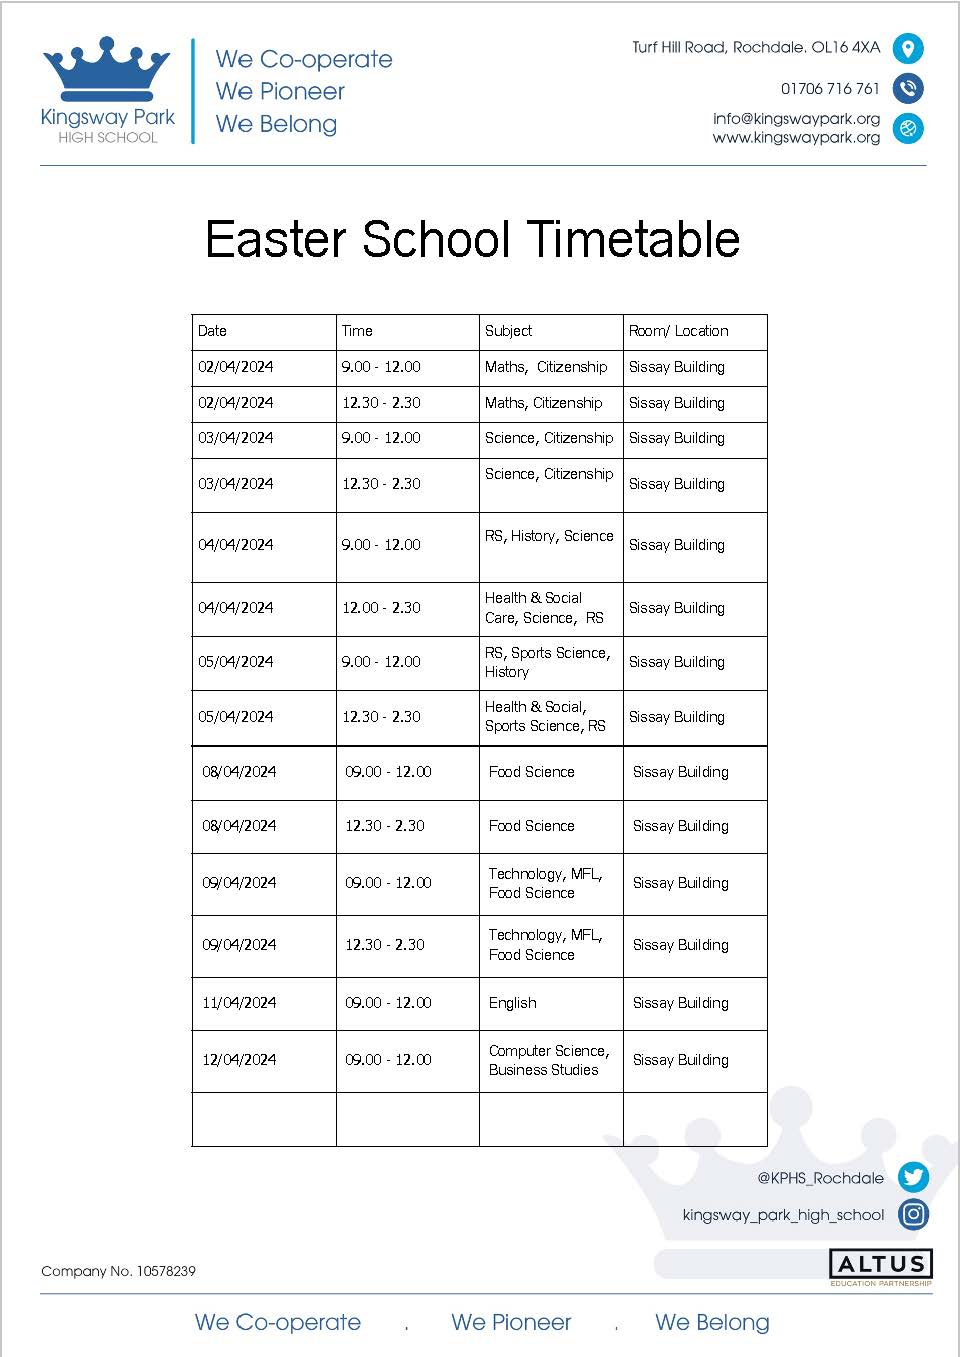 Easter School Timetable